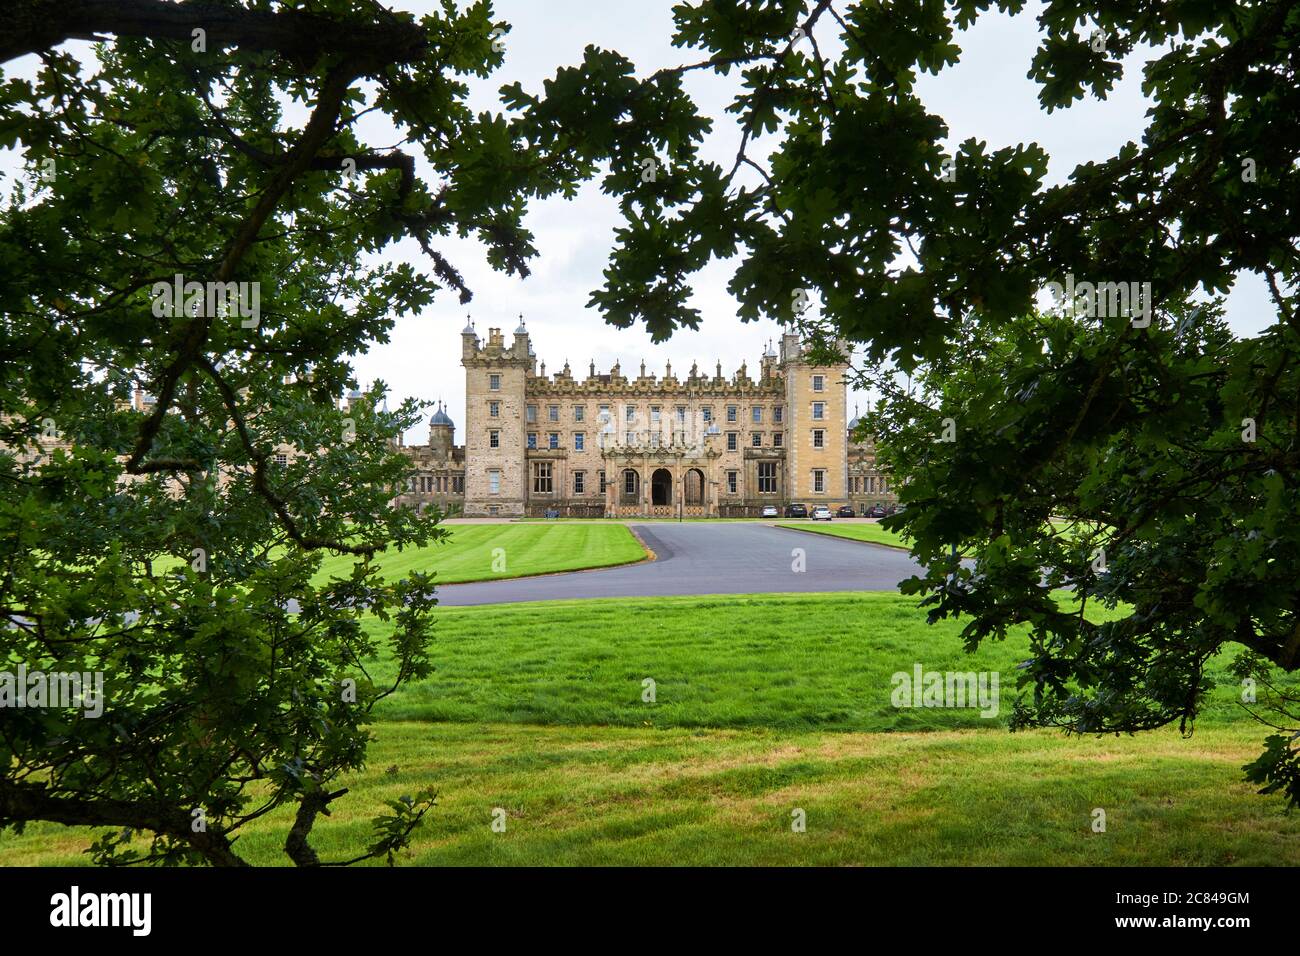 frontal view of Floors Castle and driveway framed by oak tree leaves Stock Photo